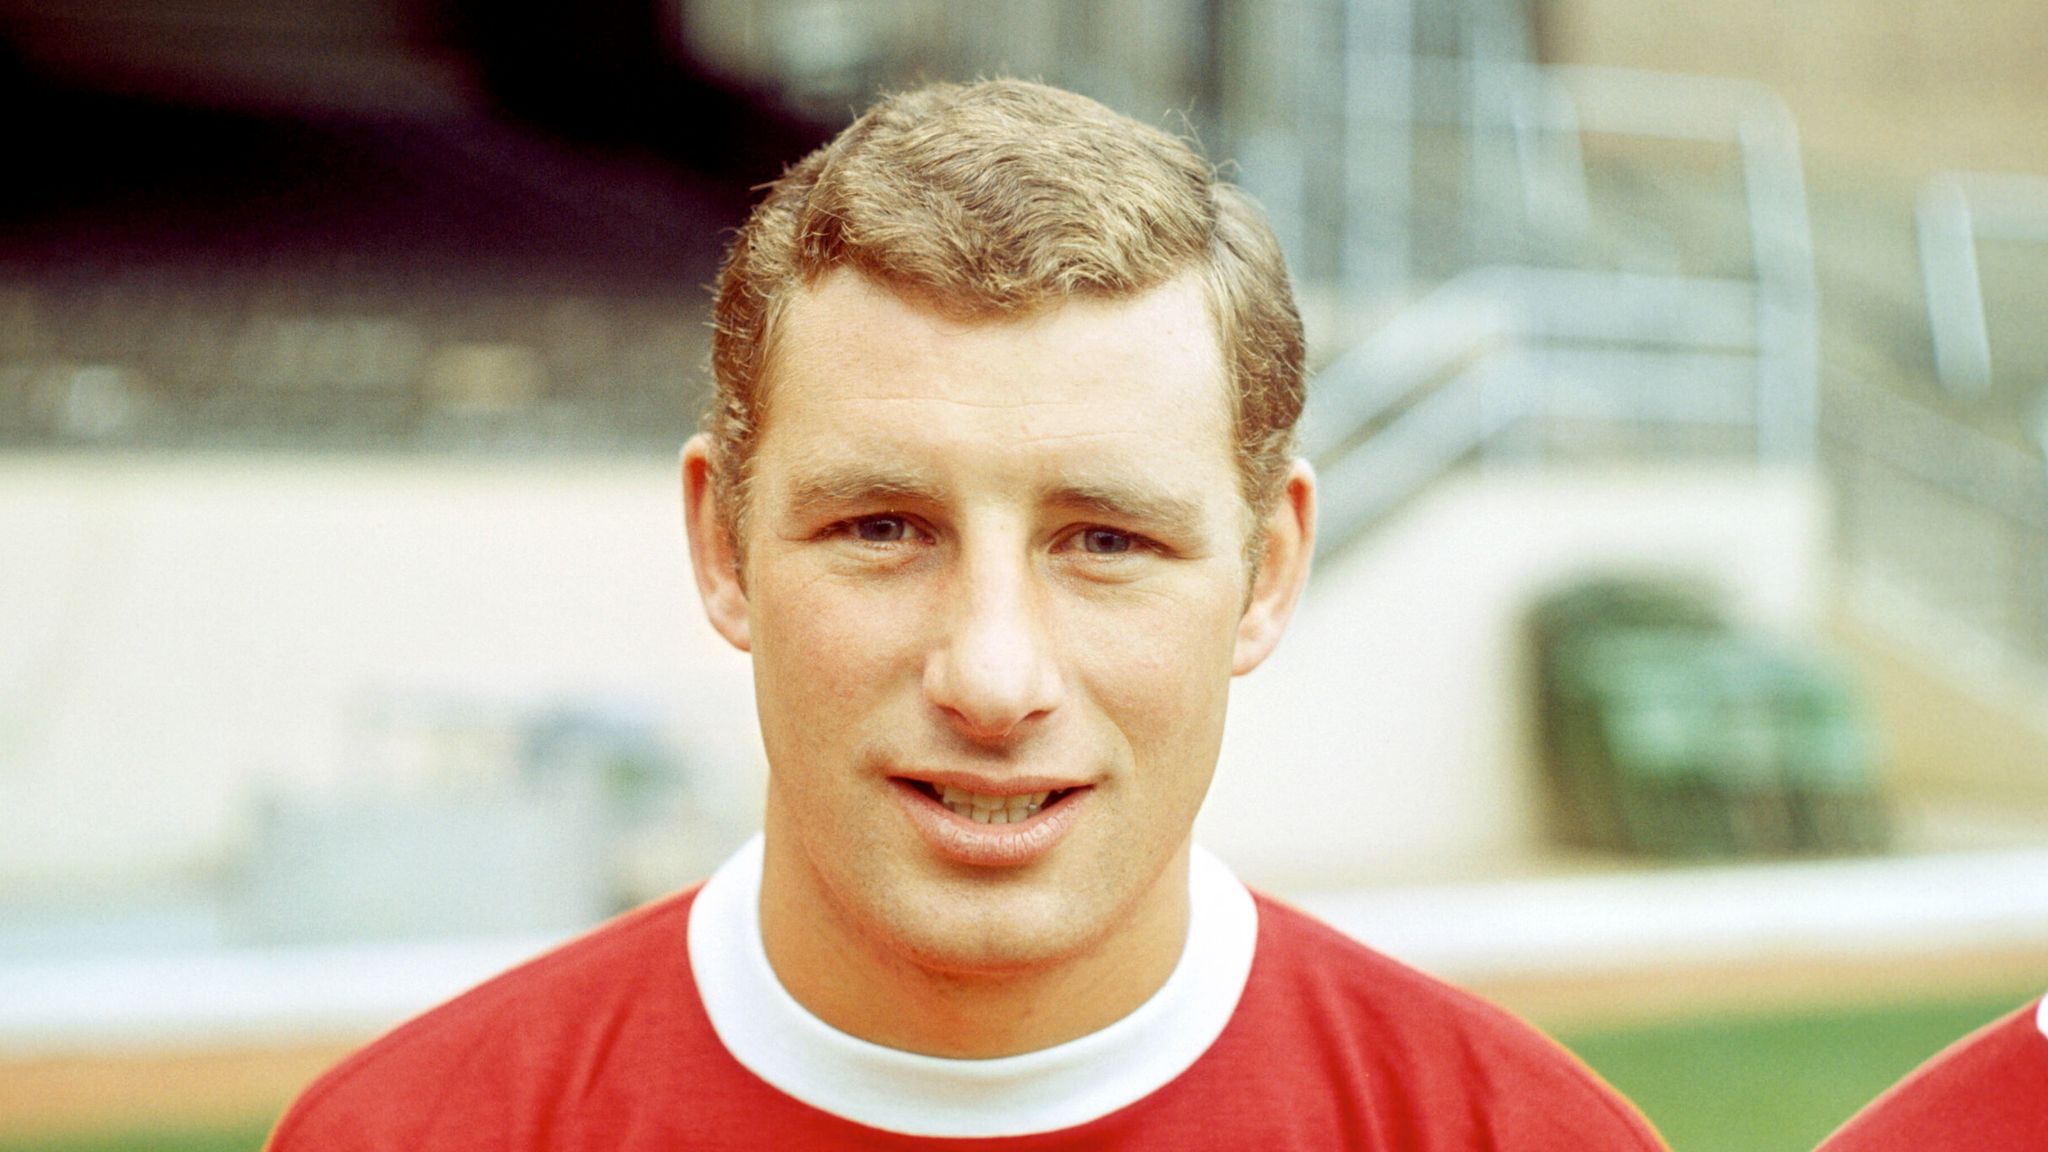 A former Arsenal captain and manager, Terry Neill, passed away at 80.